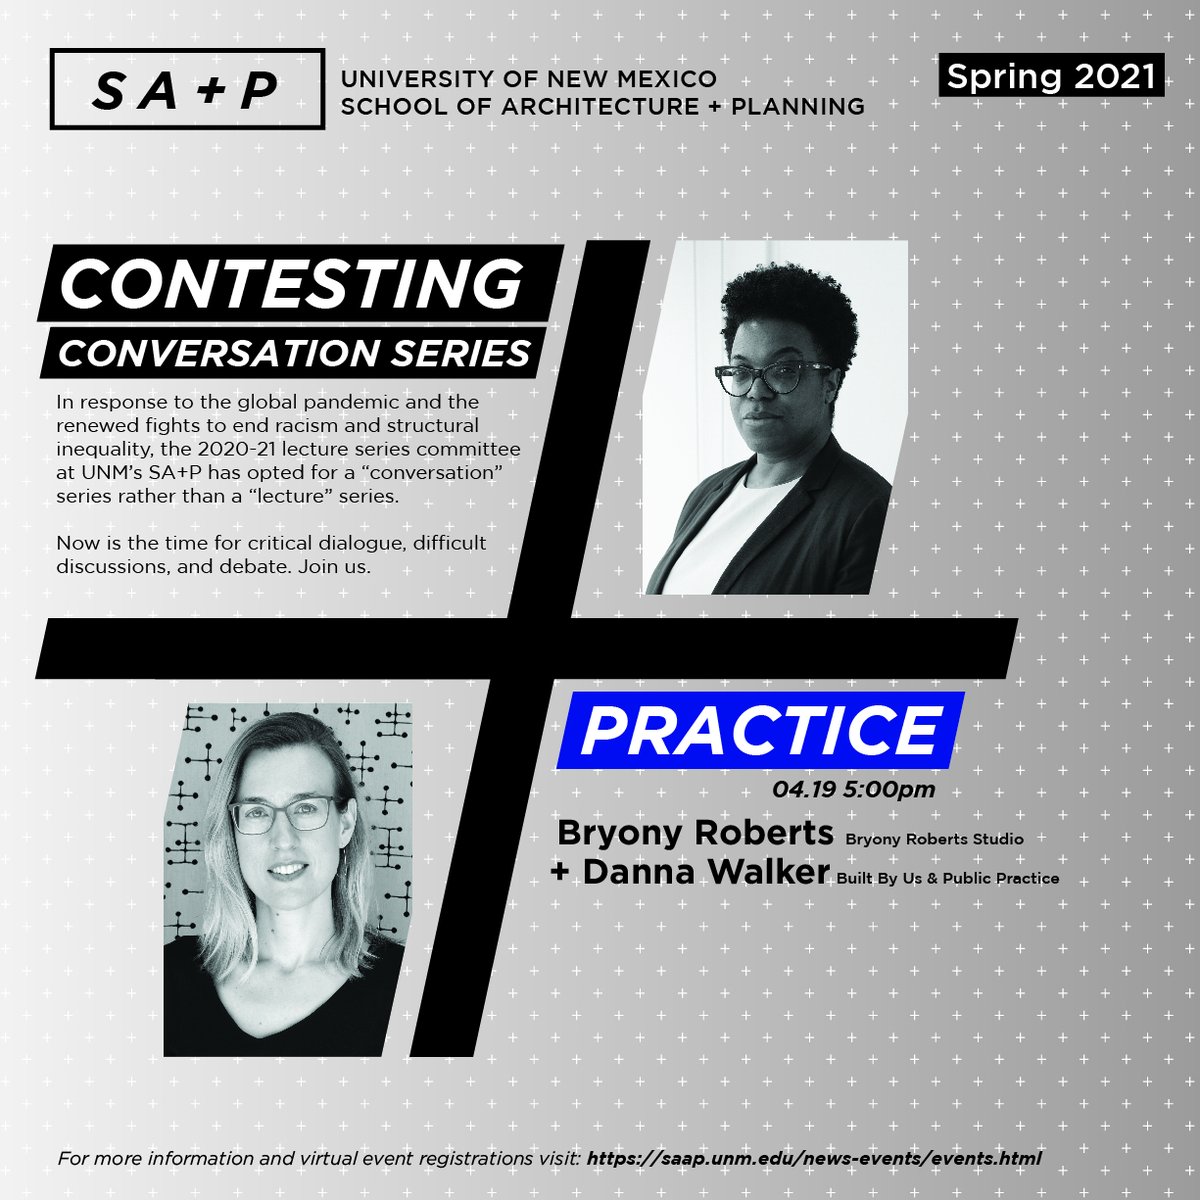 Join us Monday, April 19 at 5pm for our final conversation for the year, [Contesting] PRACTICE, with architects and advocates Danna Walker (Built By Us and Public Practice) and Bryony Roberts (Bryony Roberts Studio). Register to attend at: saap.unm.edu/news-events/ev…